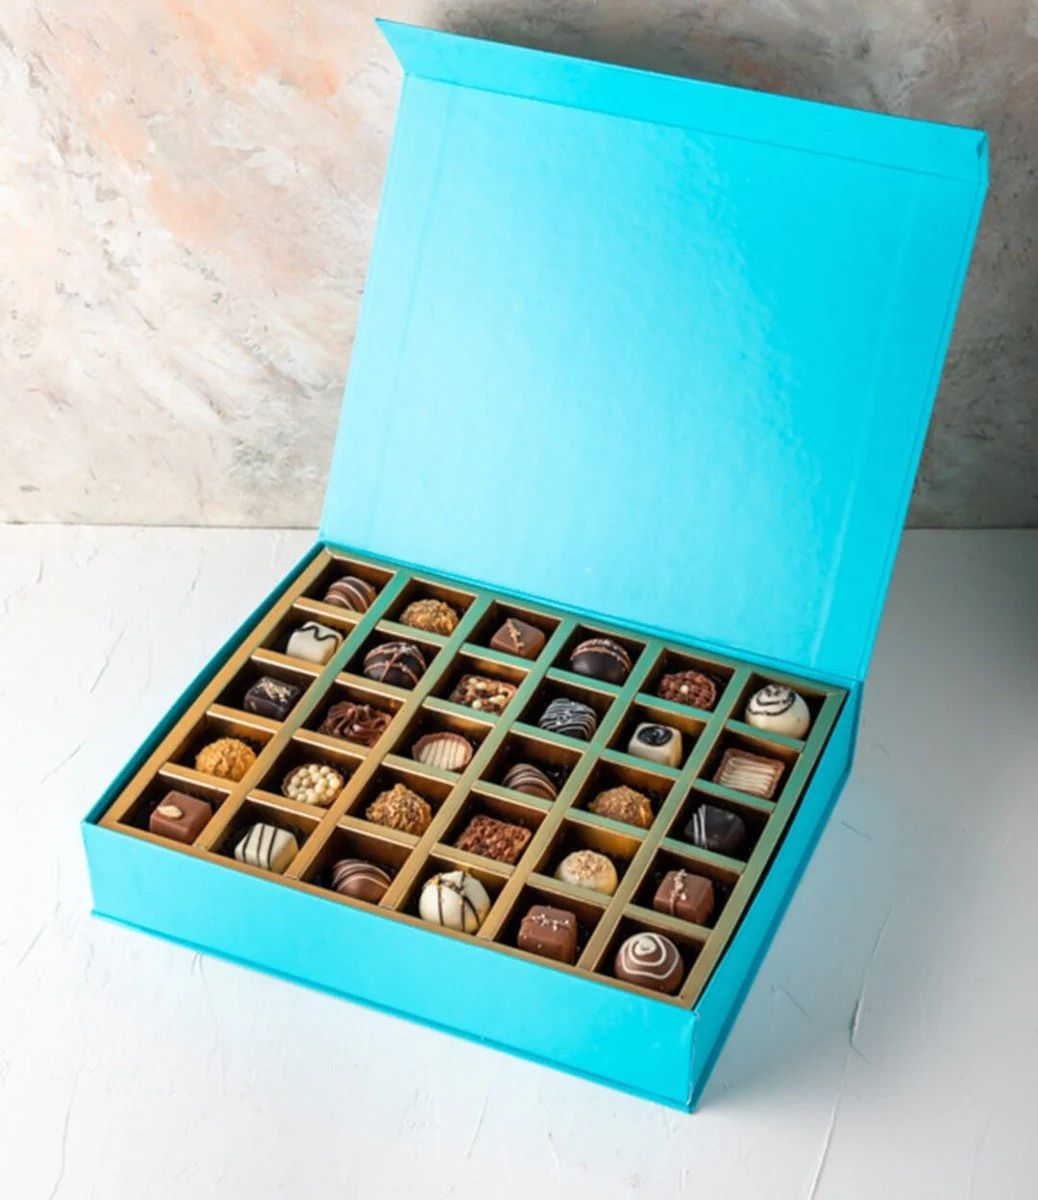 30 pcs assorted chocolates in gift box by NJD